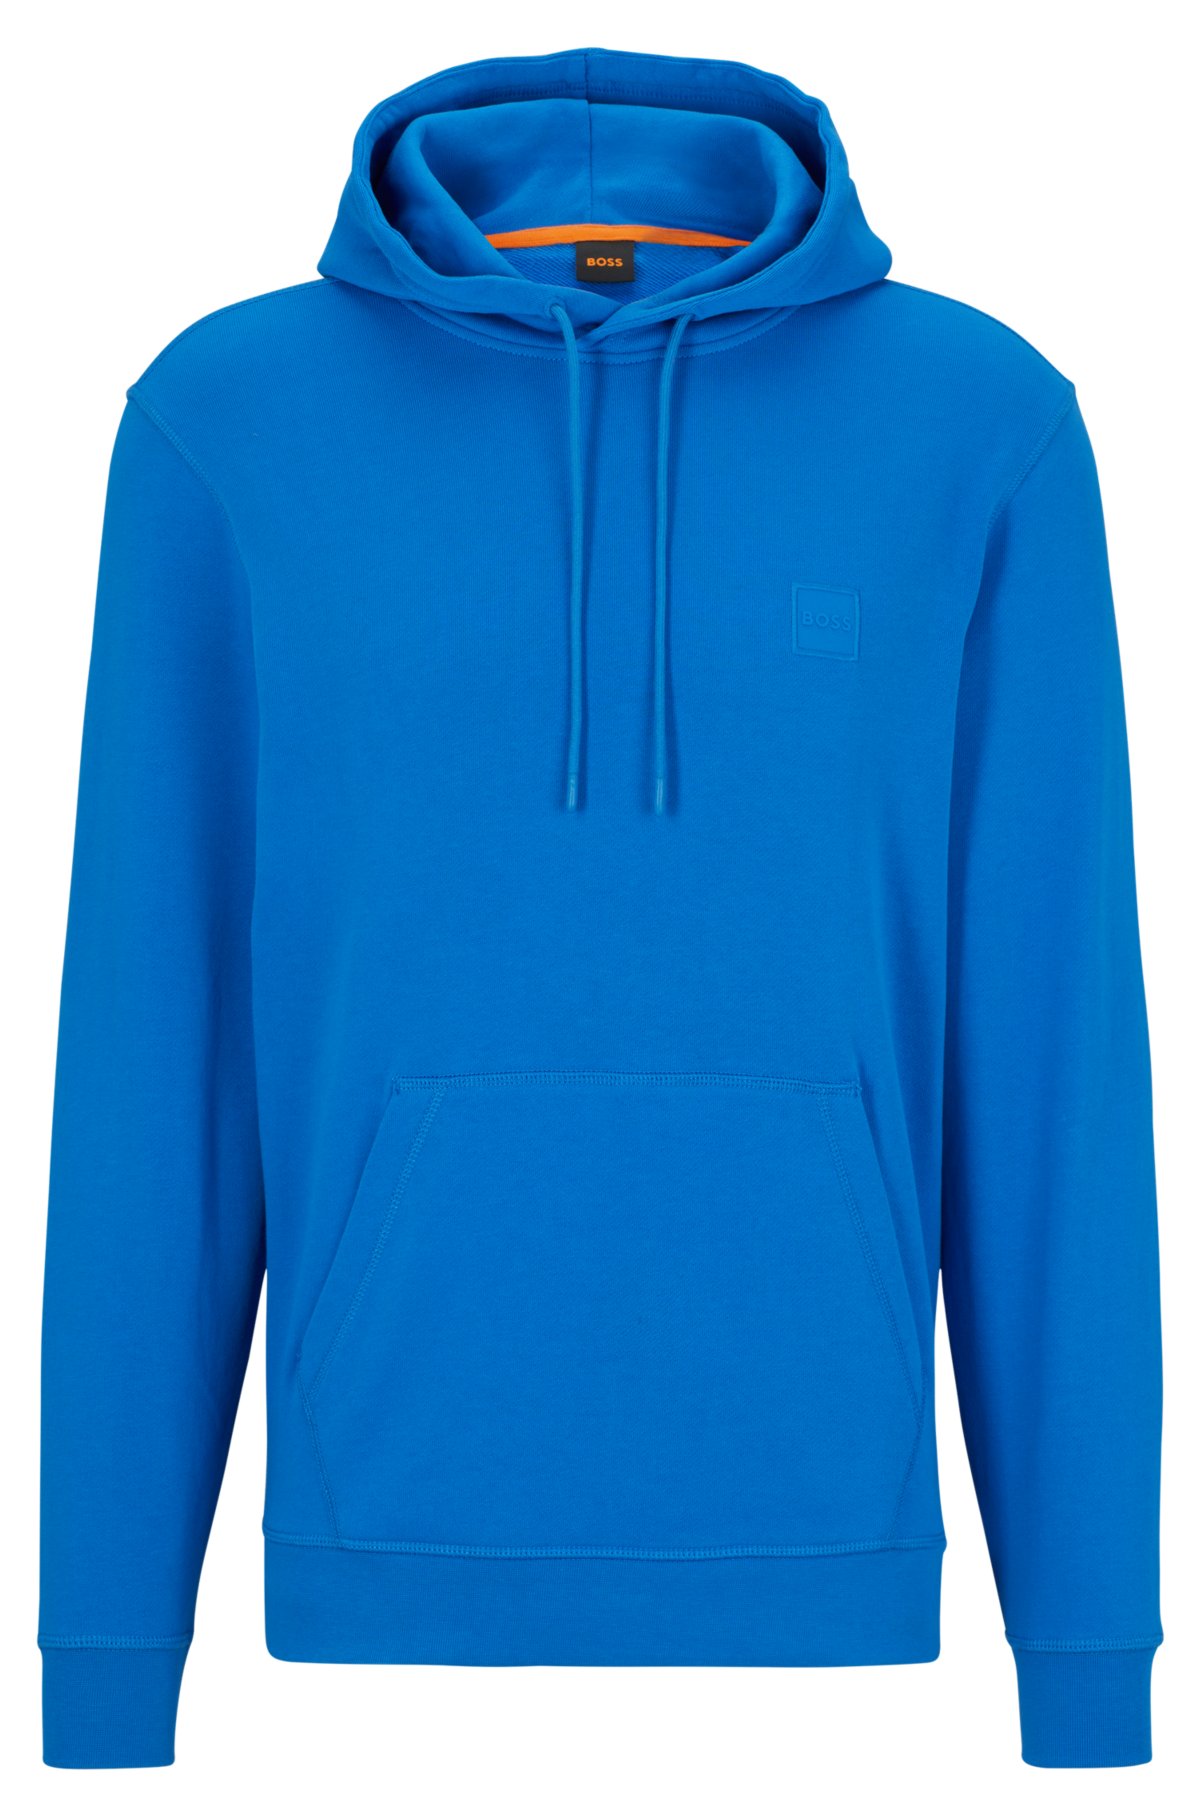 Supreme Women's Stacked Sweater Blue